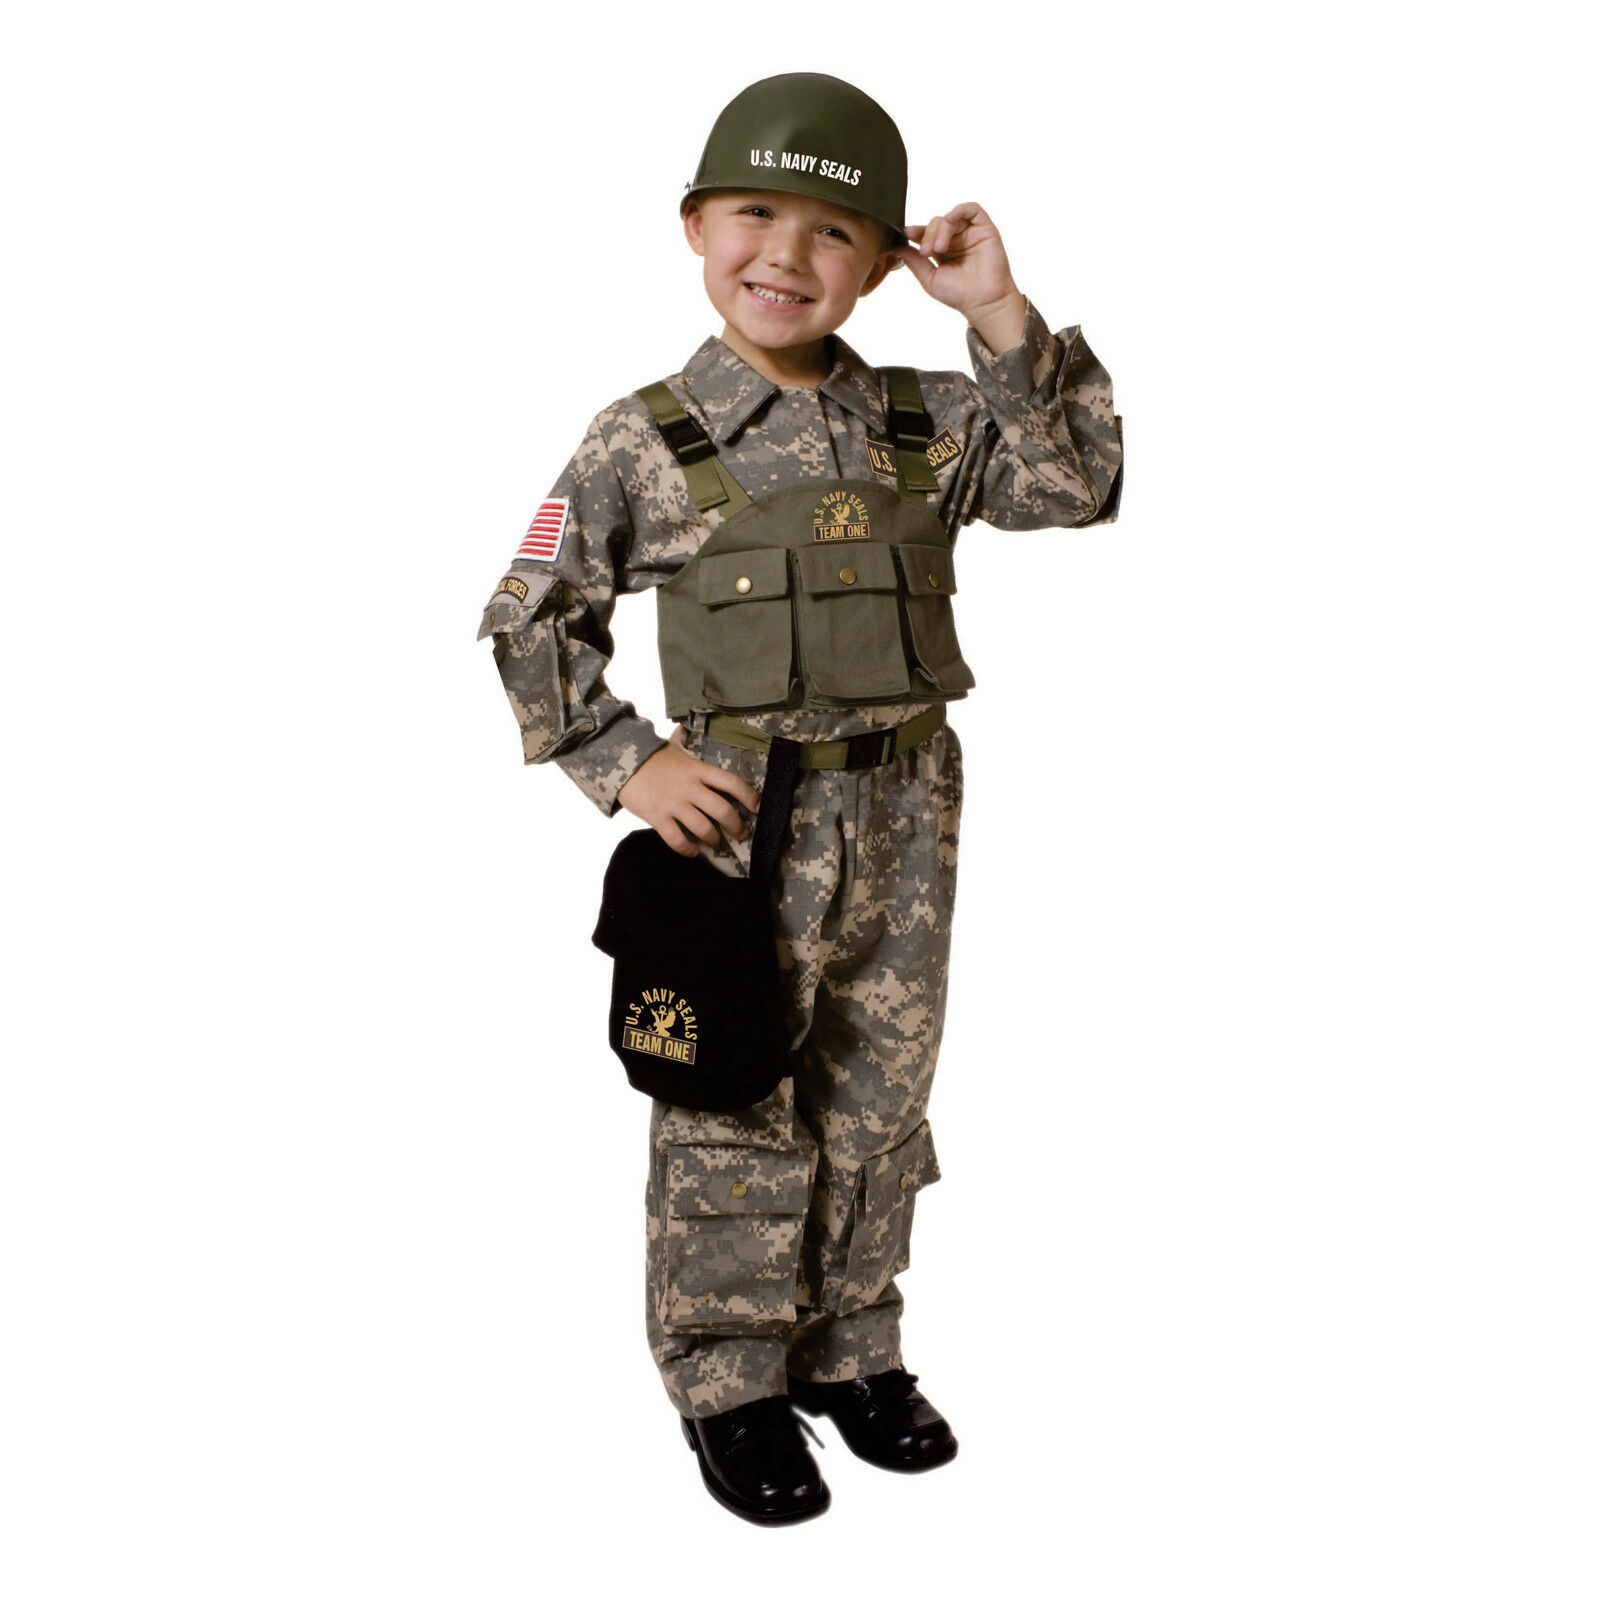 Army Costume - U.s. Military Soldier Costume For Kids By Dress Up America